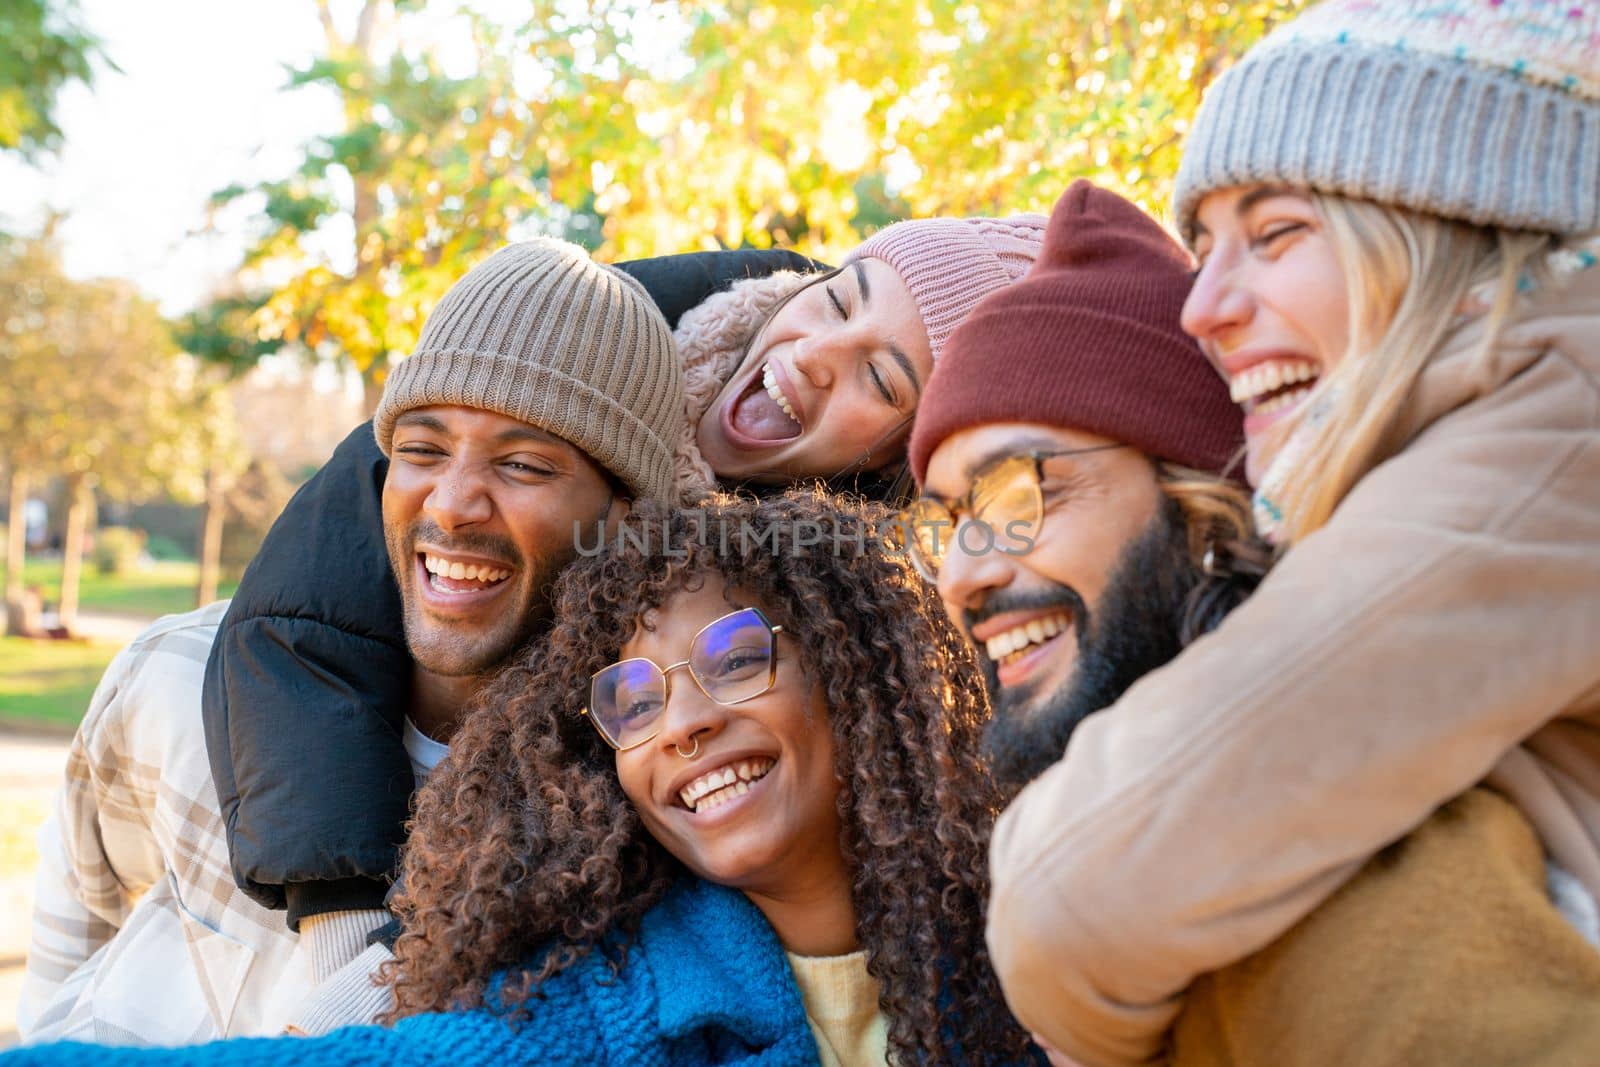 Cheerful group of friends taking smiling selfie. Happy people having fun together outdoors on vacation holidays. Concept of community, youth lifestyle and friendship. High quality photo